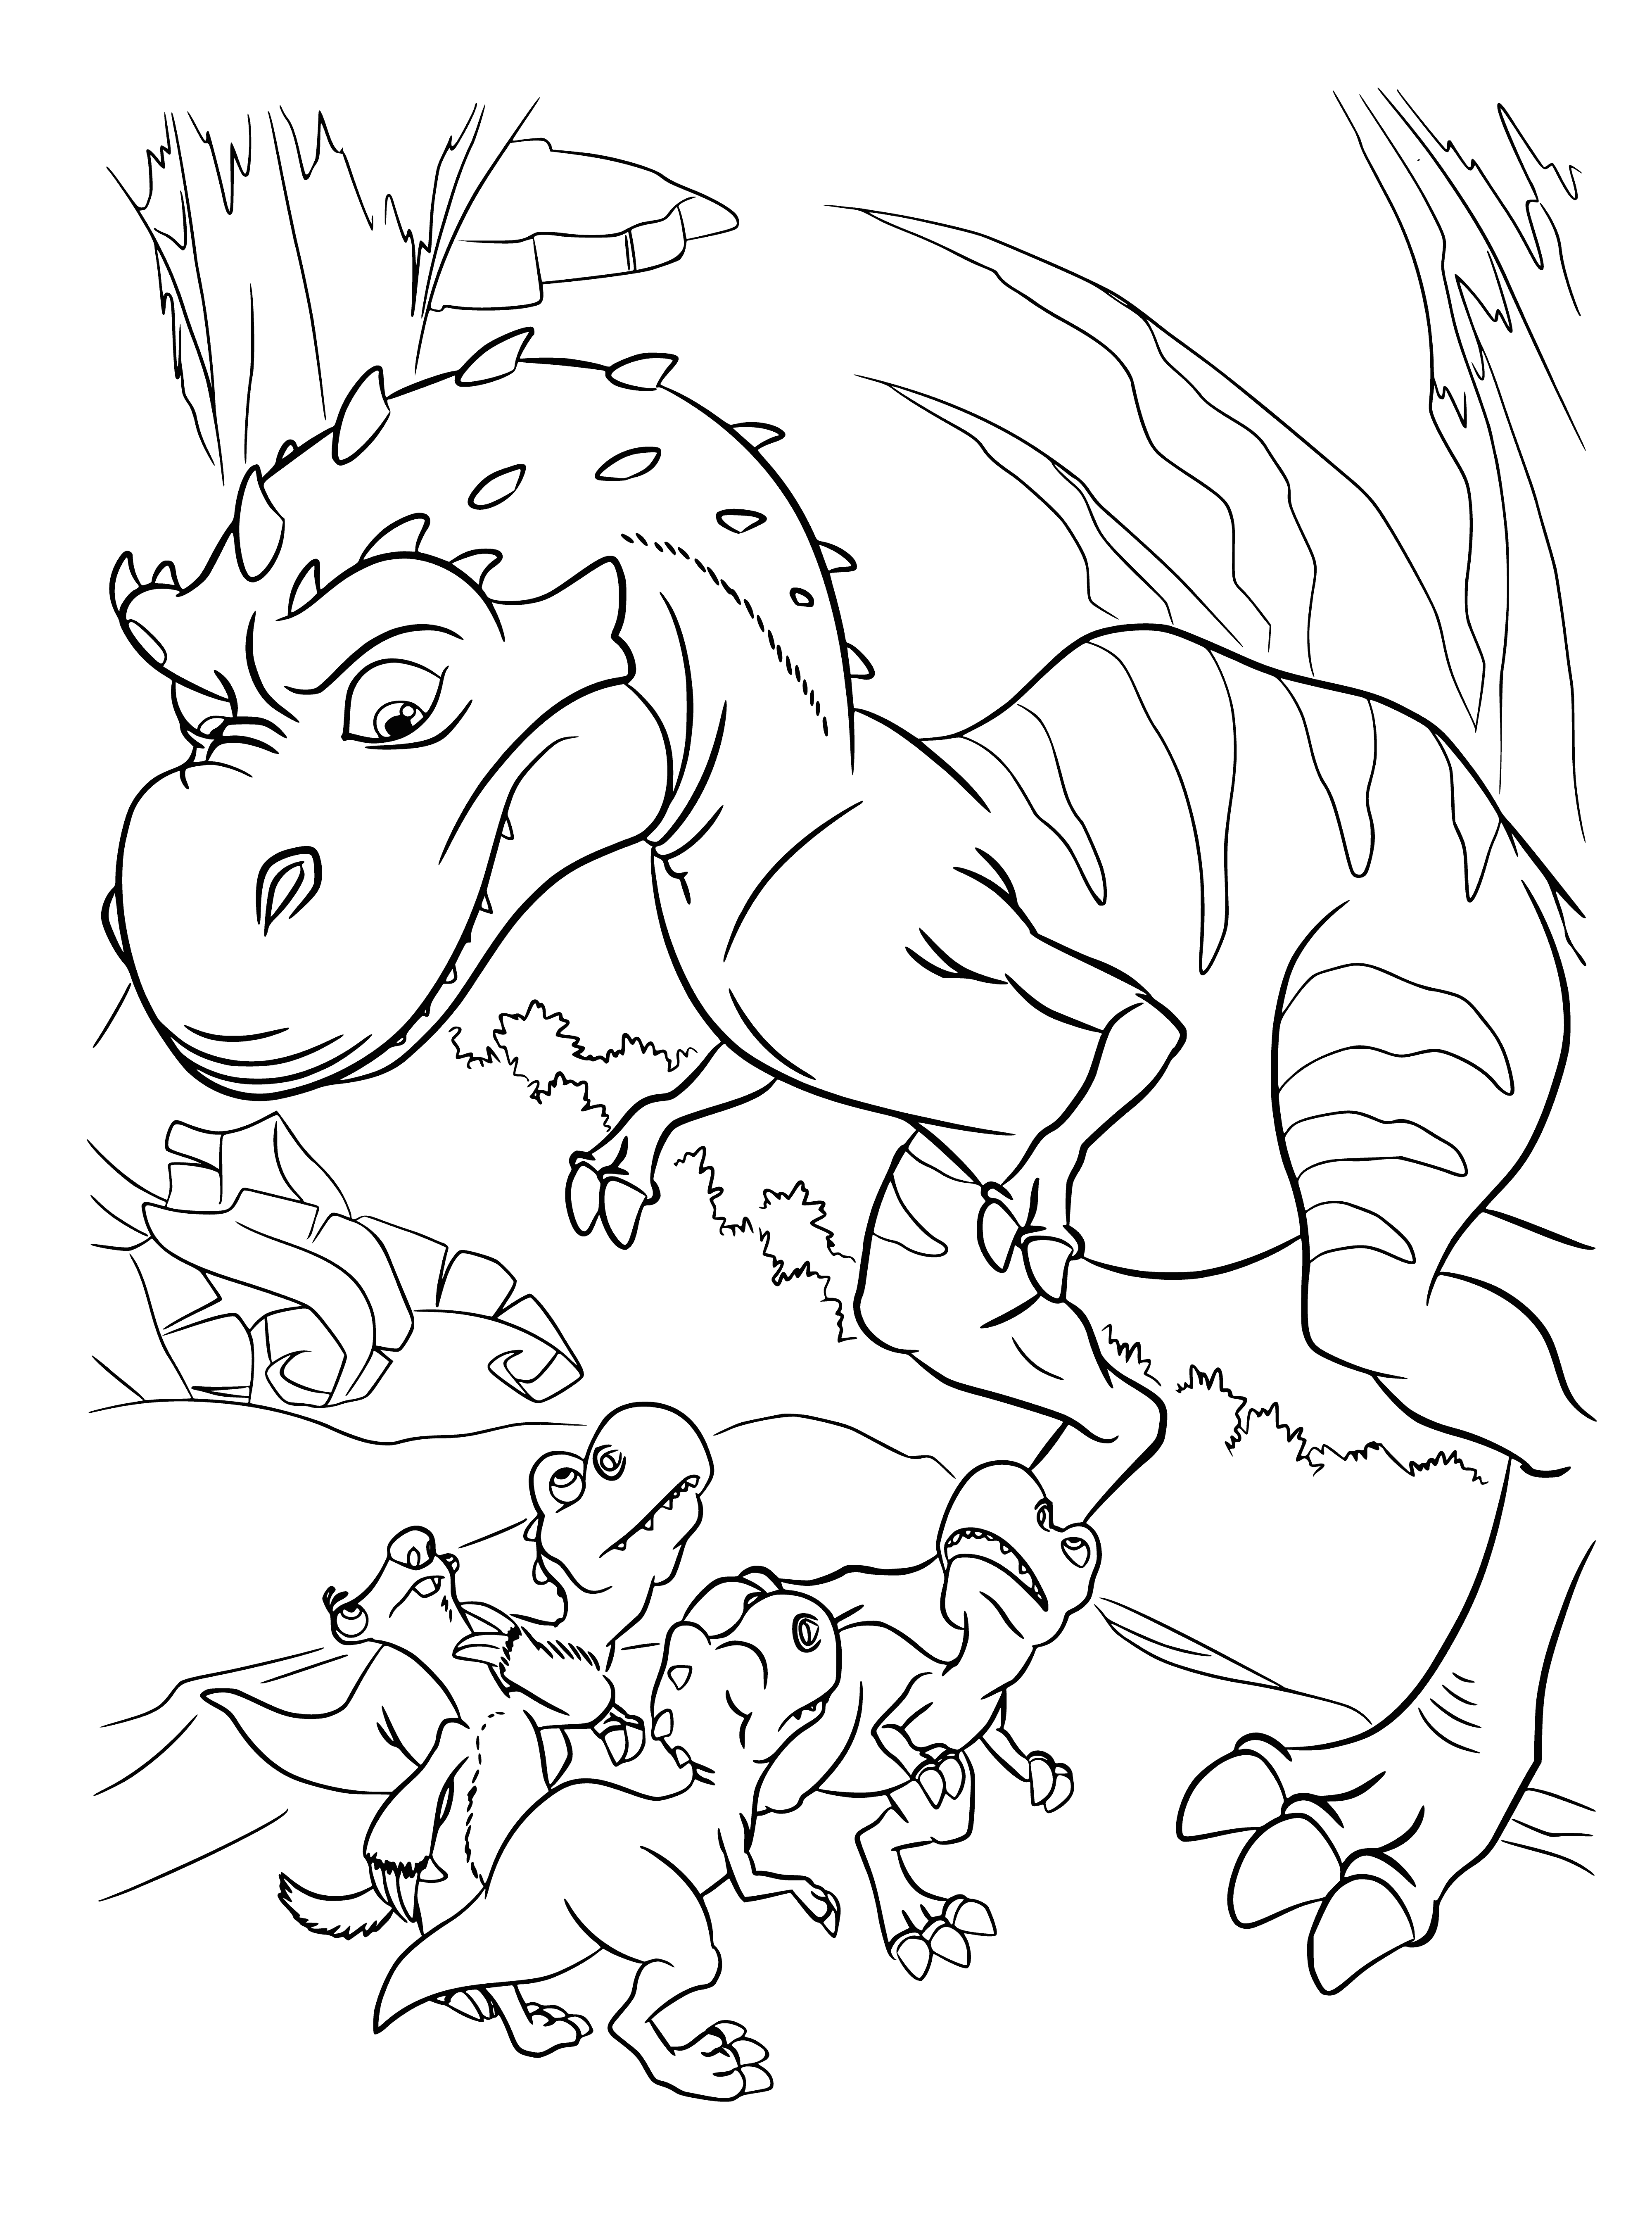 coloring page: Large green dinosaur stands in rocky area with open mouth, closed eyes, short arms & long legs ending in 3-toed feet. Tail points & mountains in background.